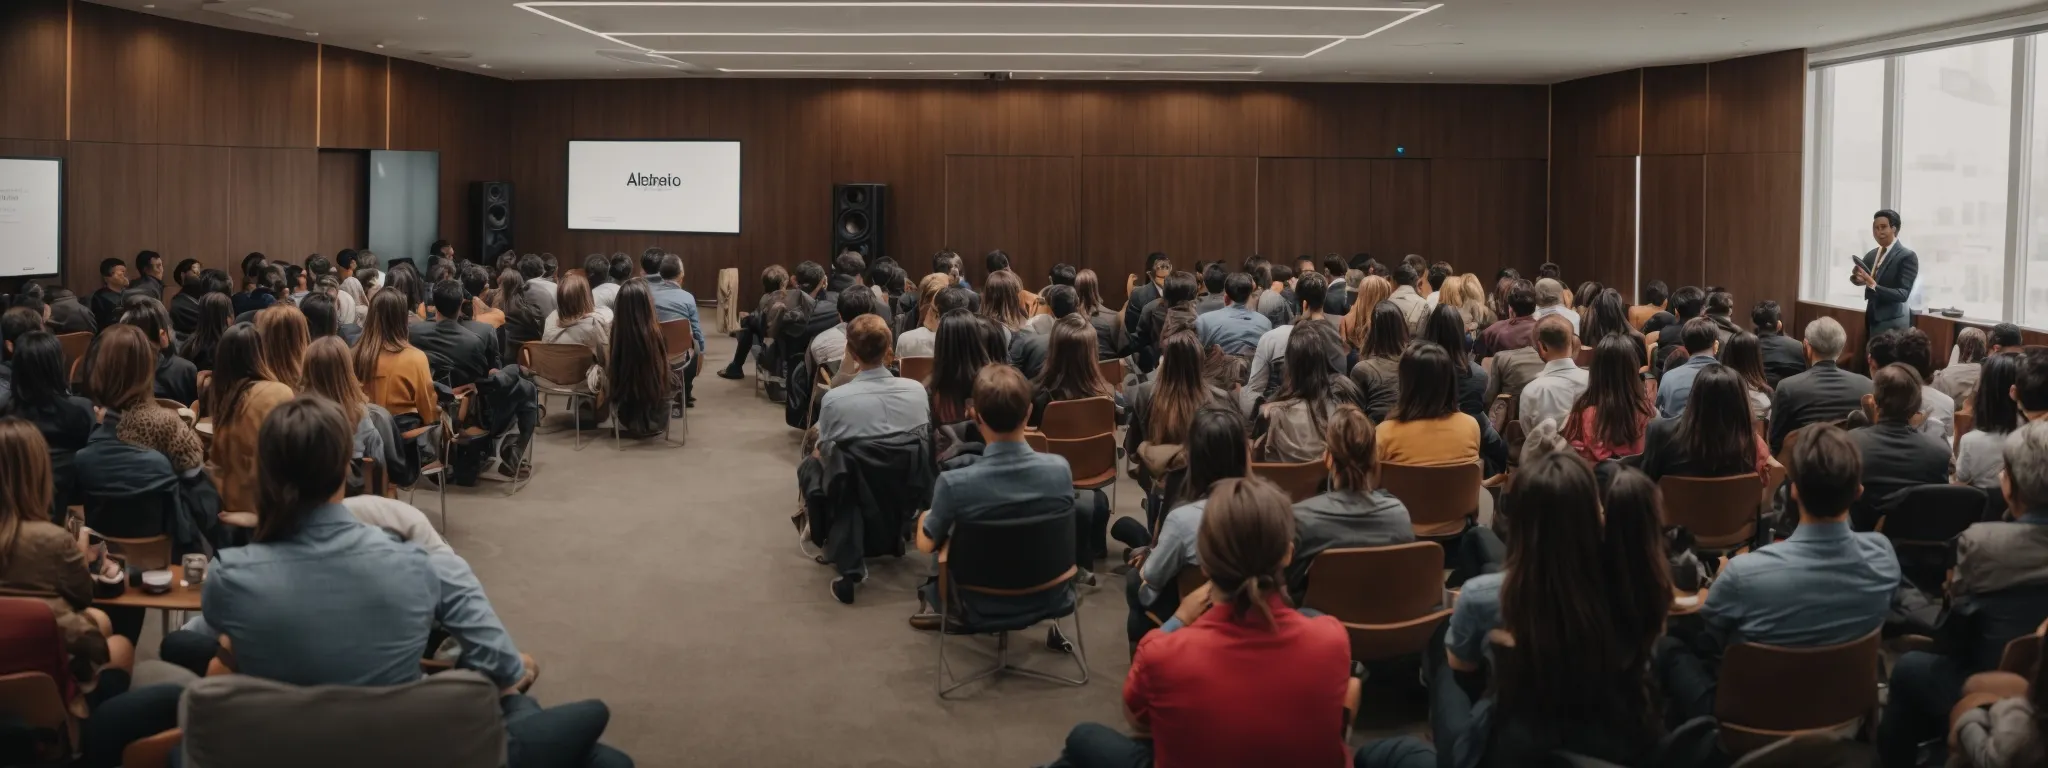 a lively conference room at airbnb's headquarters with a speaker presenting to an engaged audience.